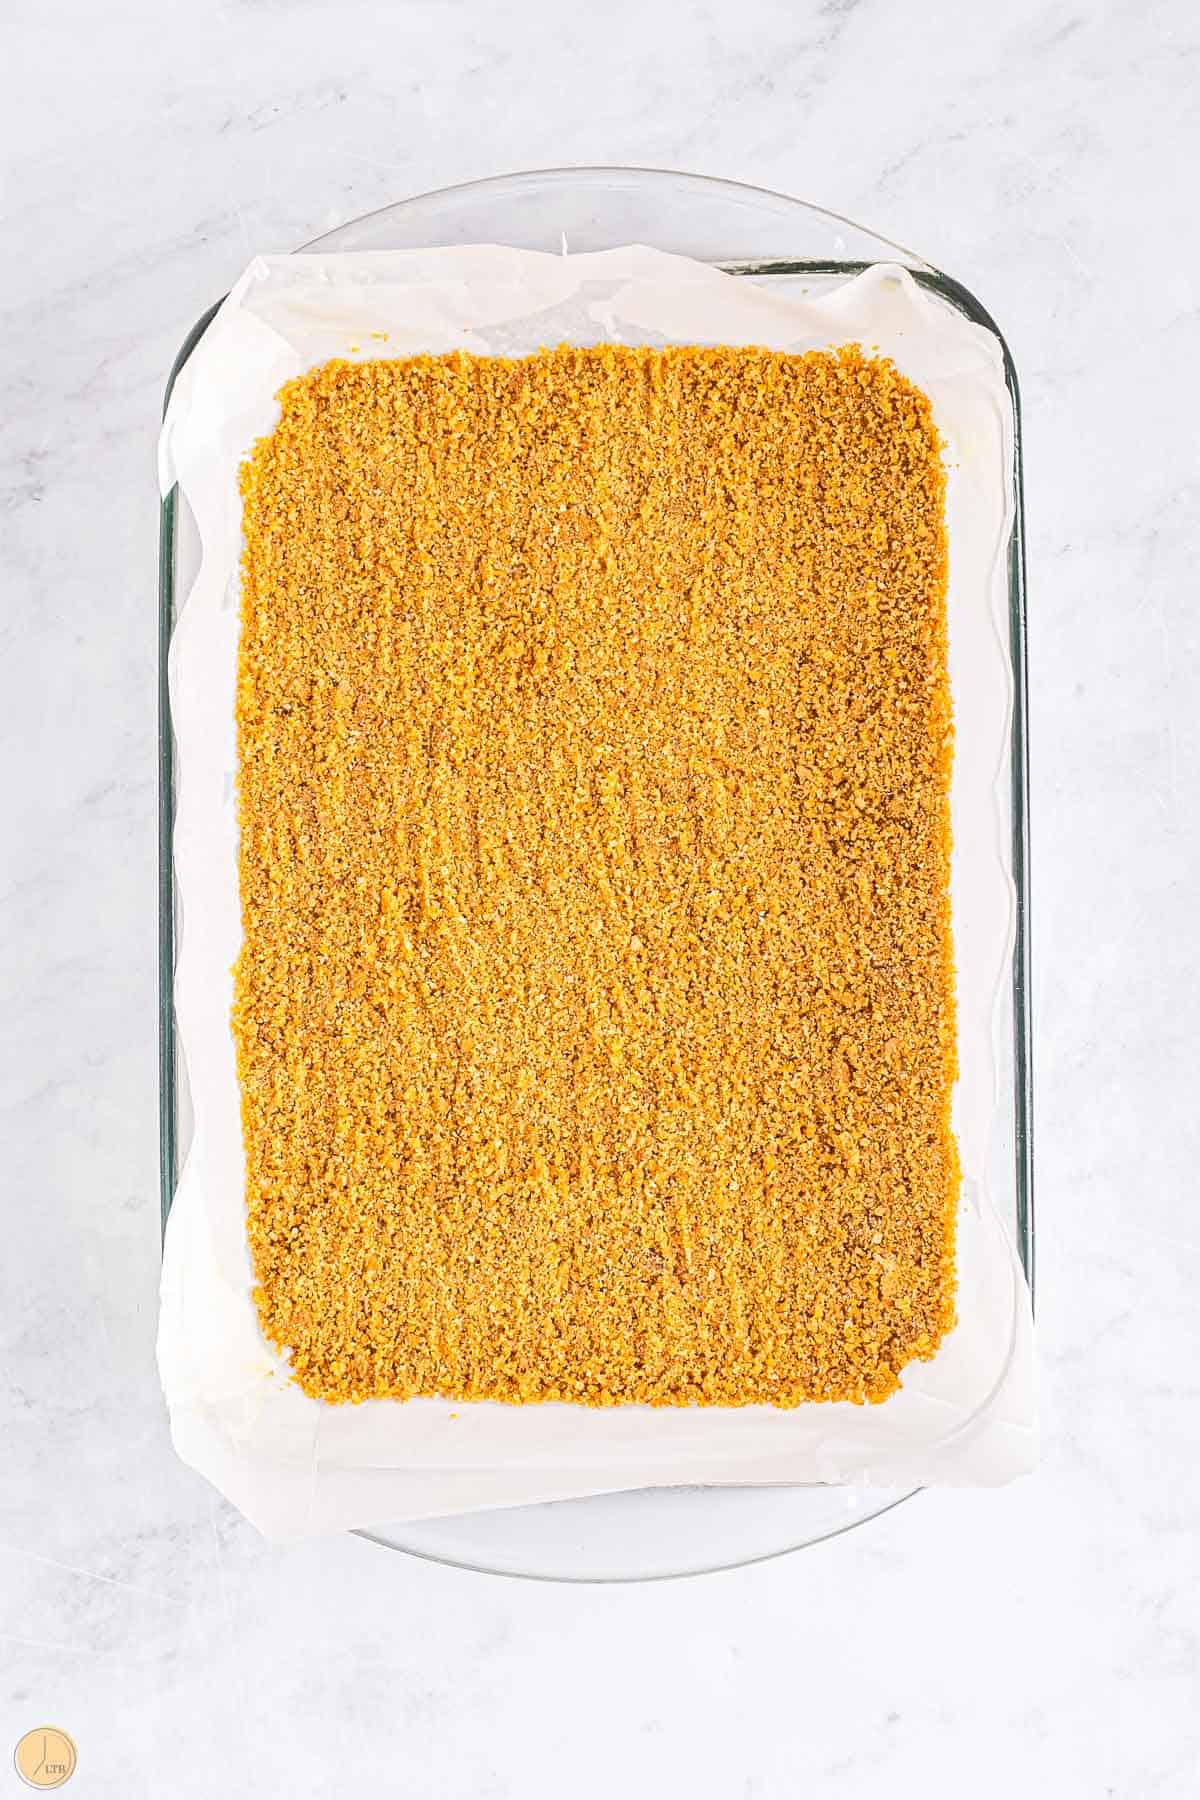 graham cracker crust in the bottom of a pan